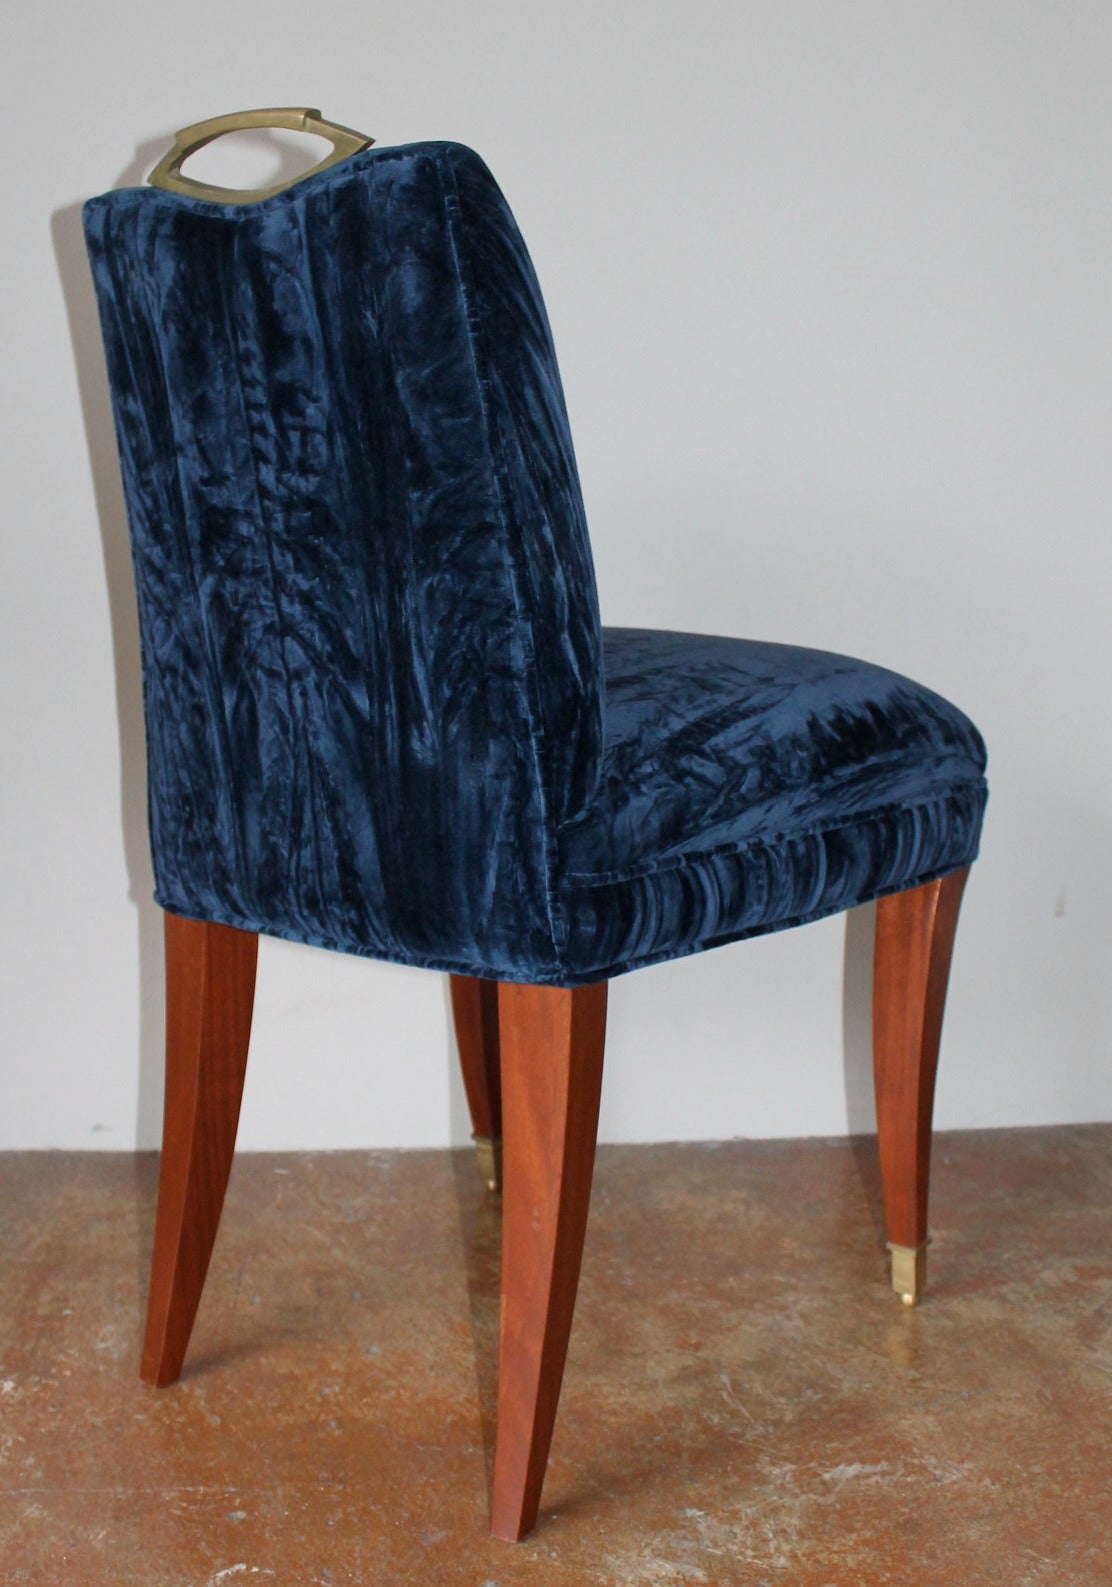 Arturo Pani Mahogany and Crushed Blue Velvet Dining Chairs, Mexico, 1950s 3